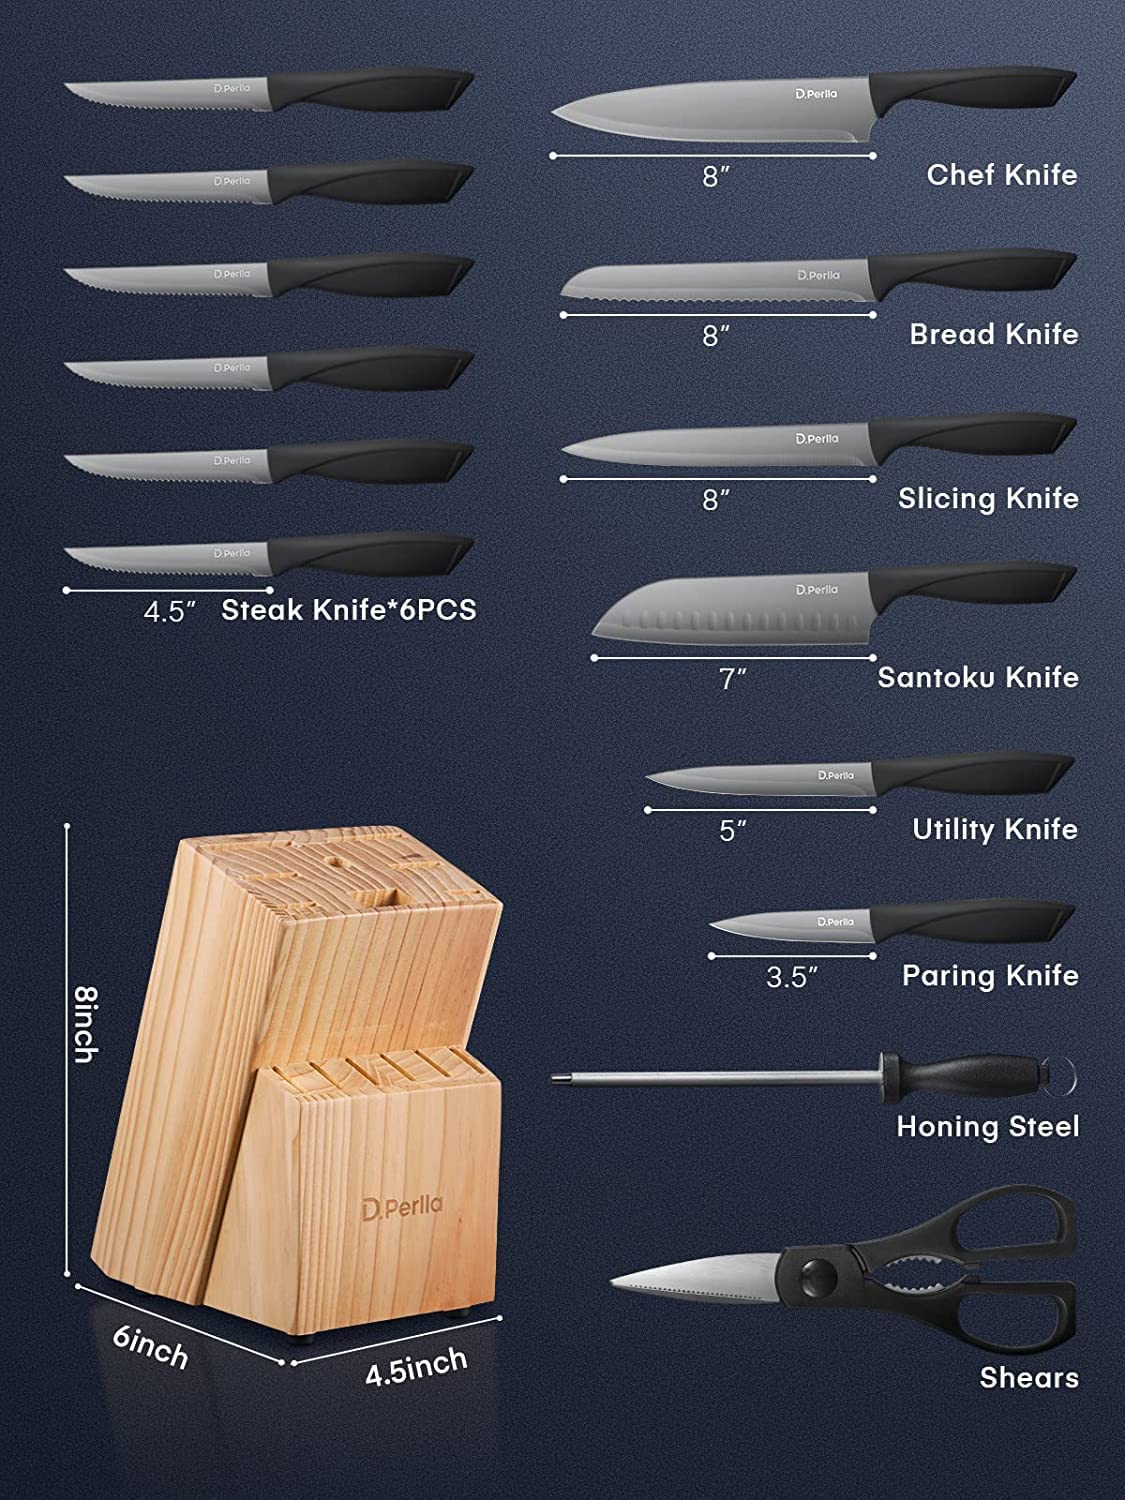 D.Perlla Knife Set with Block, 15 Pieces Stainless Steel Kitchen Knife Set with BO Oxidation Technology, No Rust, Sharp Knife Block Set